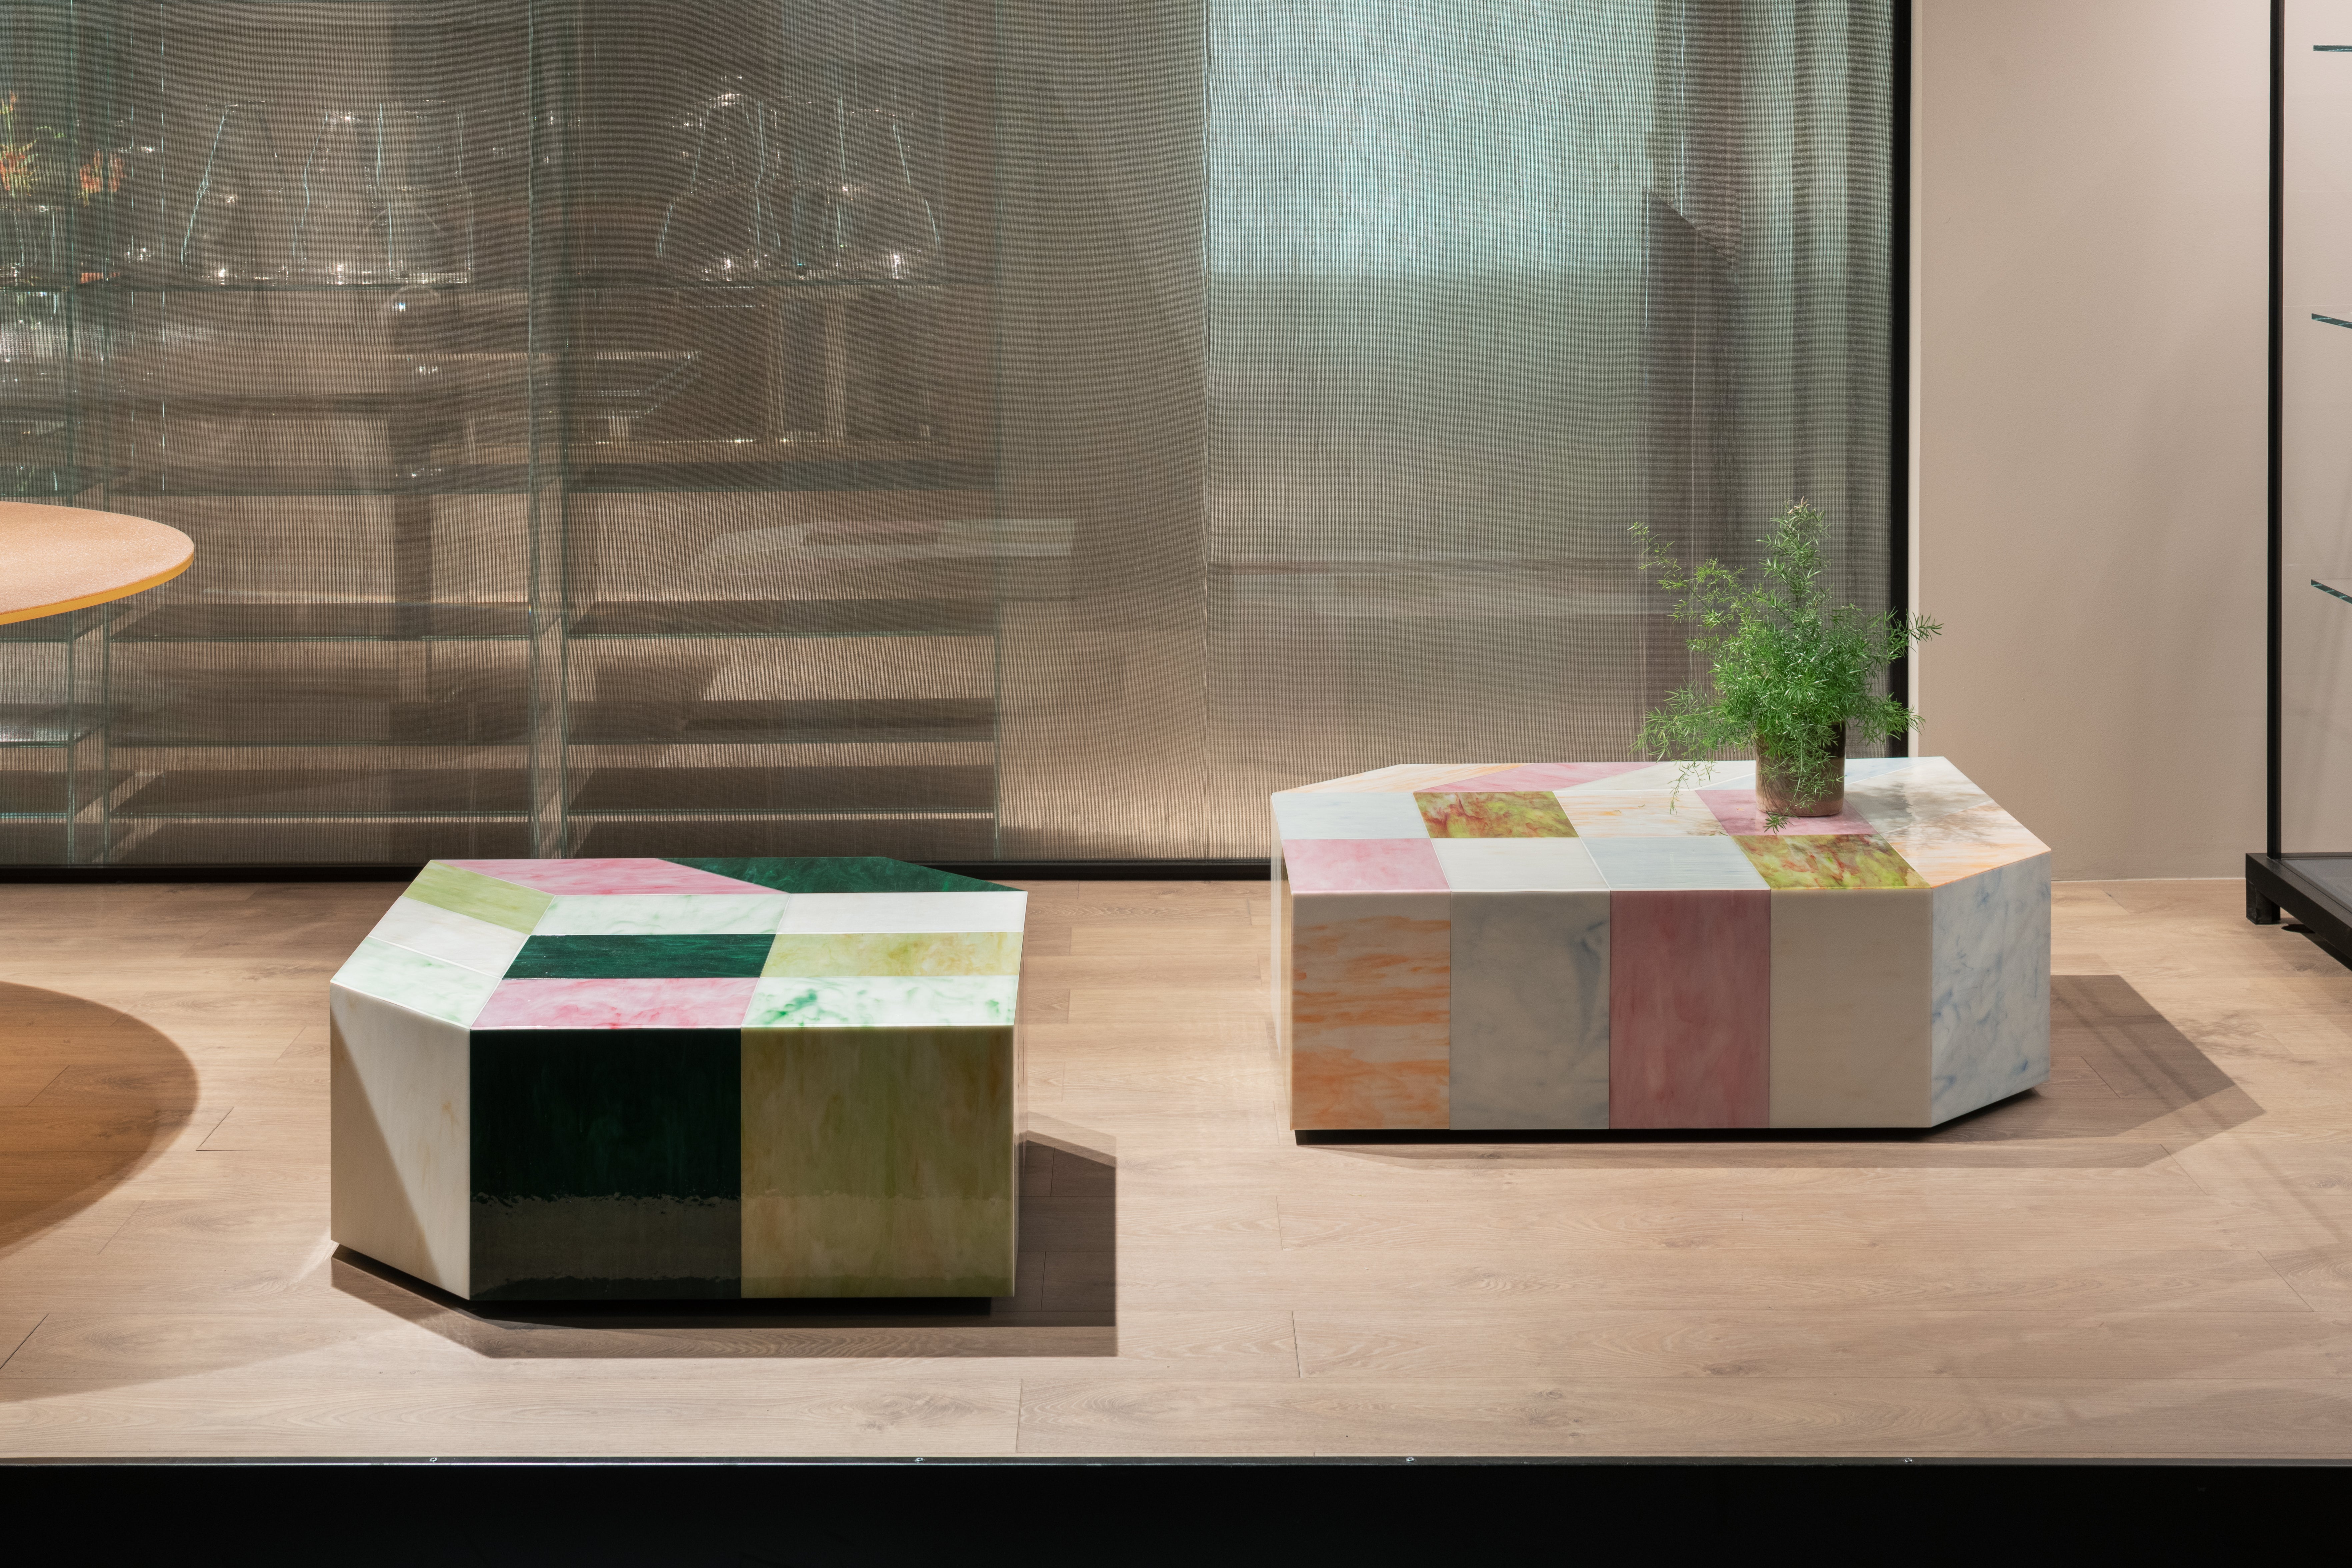 There Are Thousands of Products to See at Milan’s Design Week—These Were My 8 Standouts